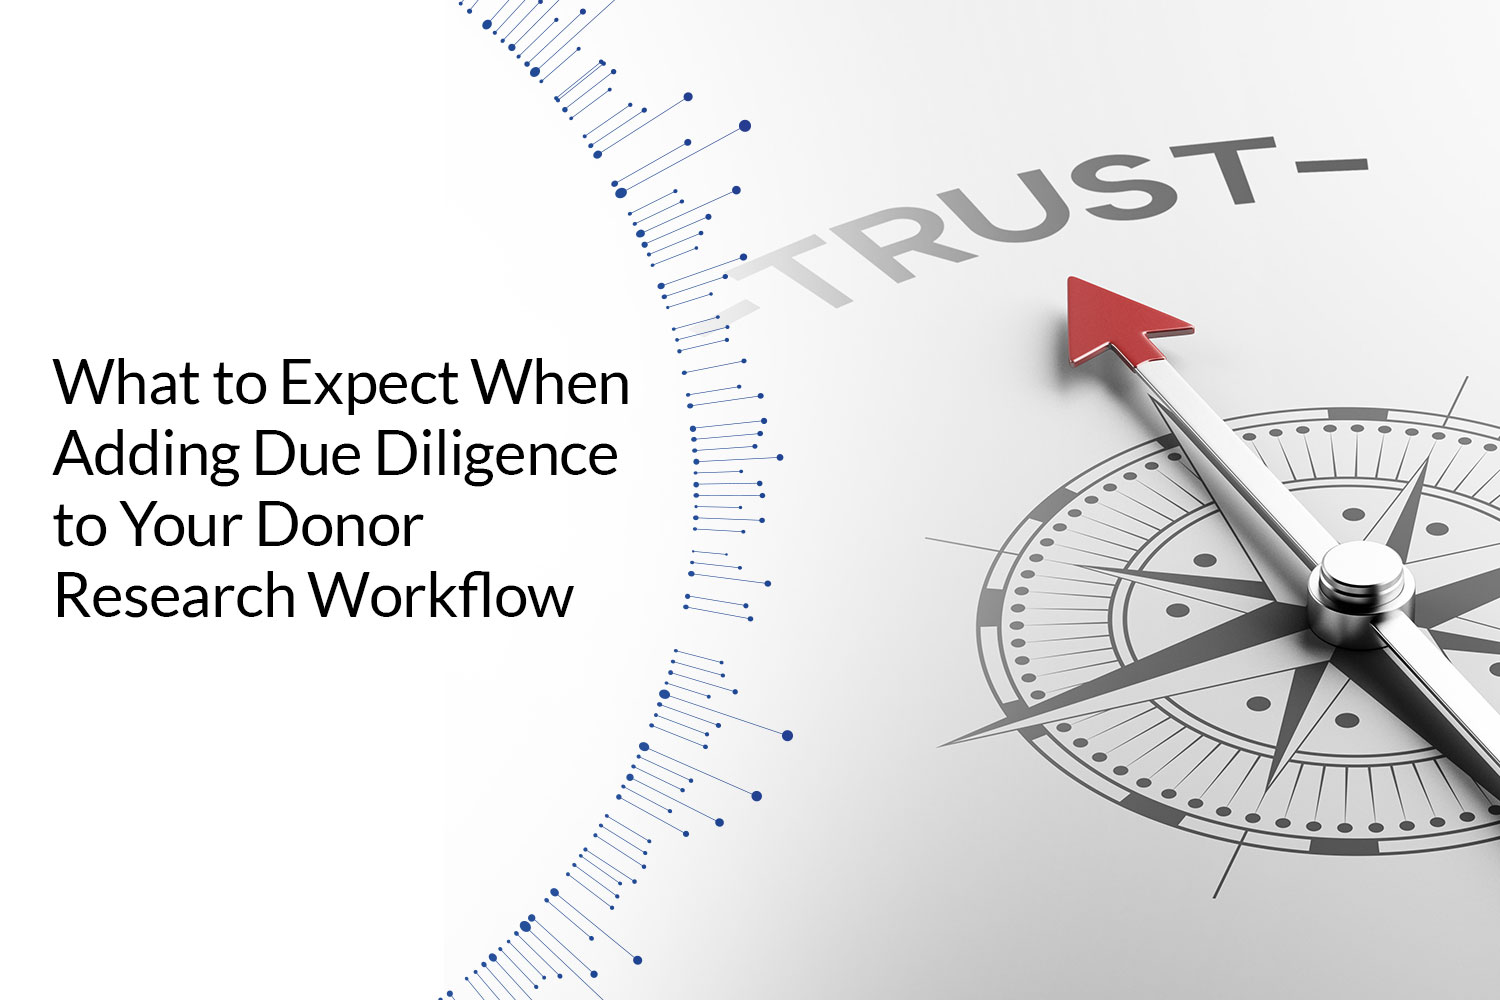 What to Expect When Adding Due Diligence to Your Donor Research Workflow